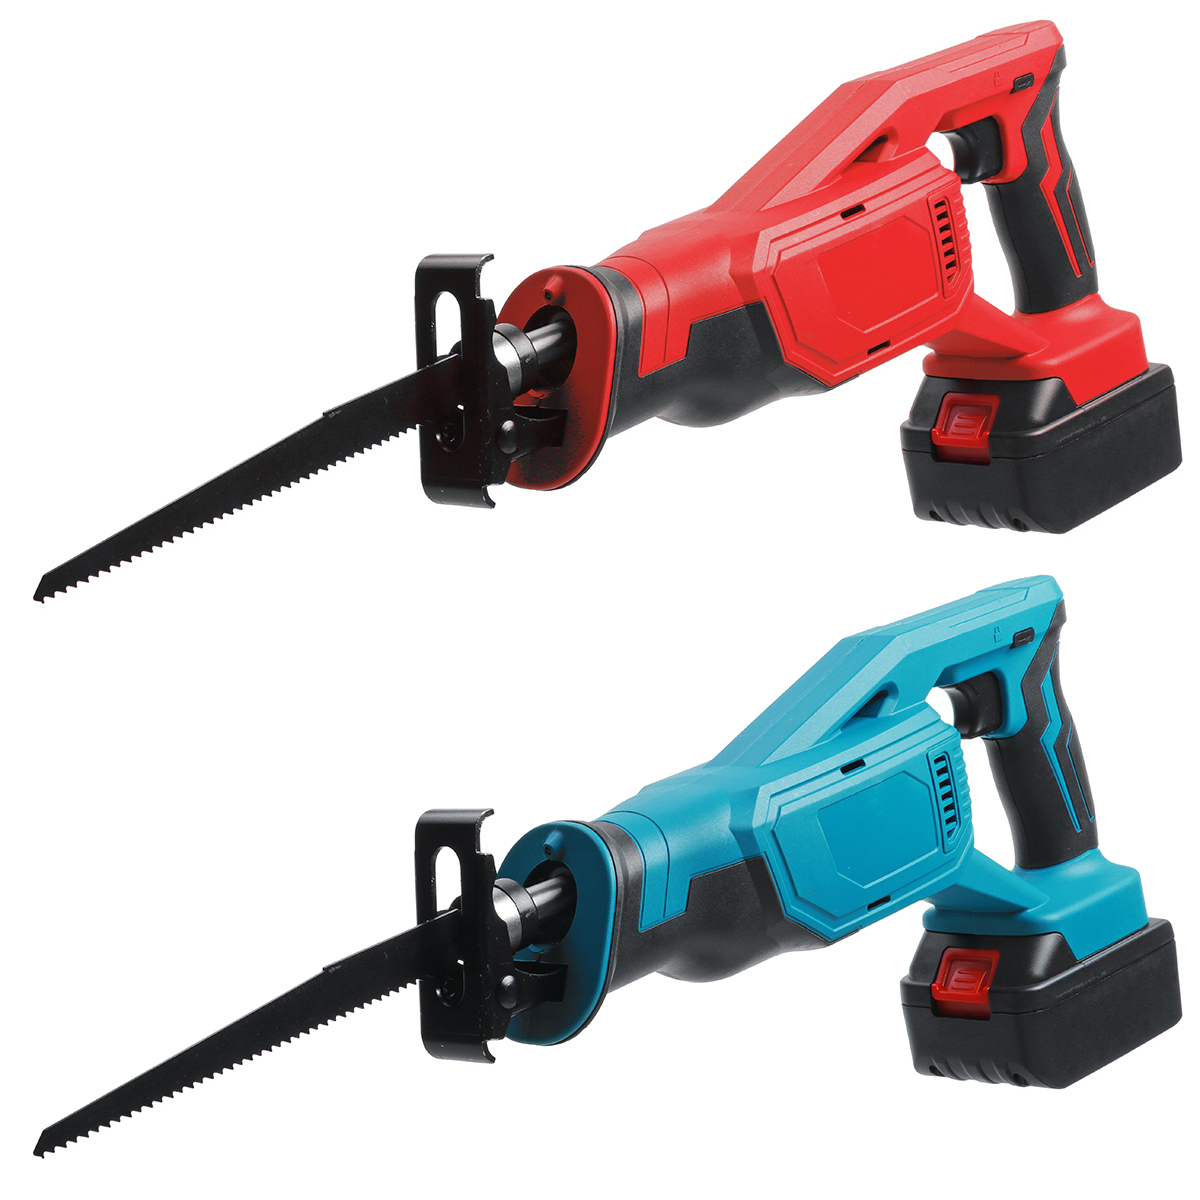 21V-5000Rpm-Reciprocating-Saw-Professional-Electric-Branch-Cutter-Recipro-Saw-W-1pc-Battery-1818077-3